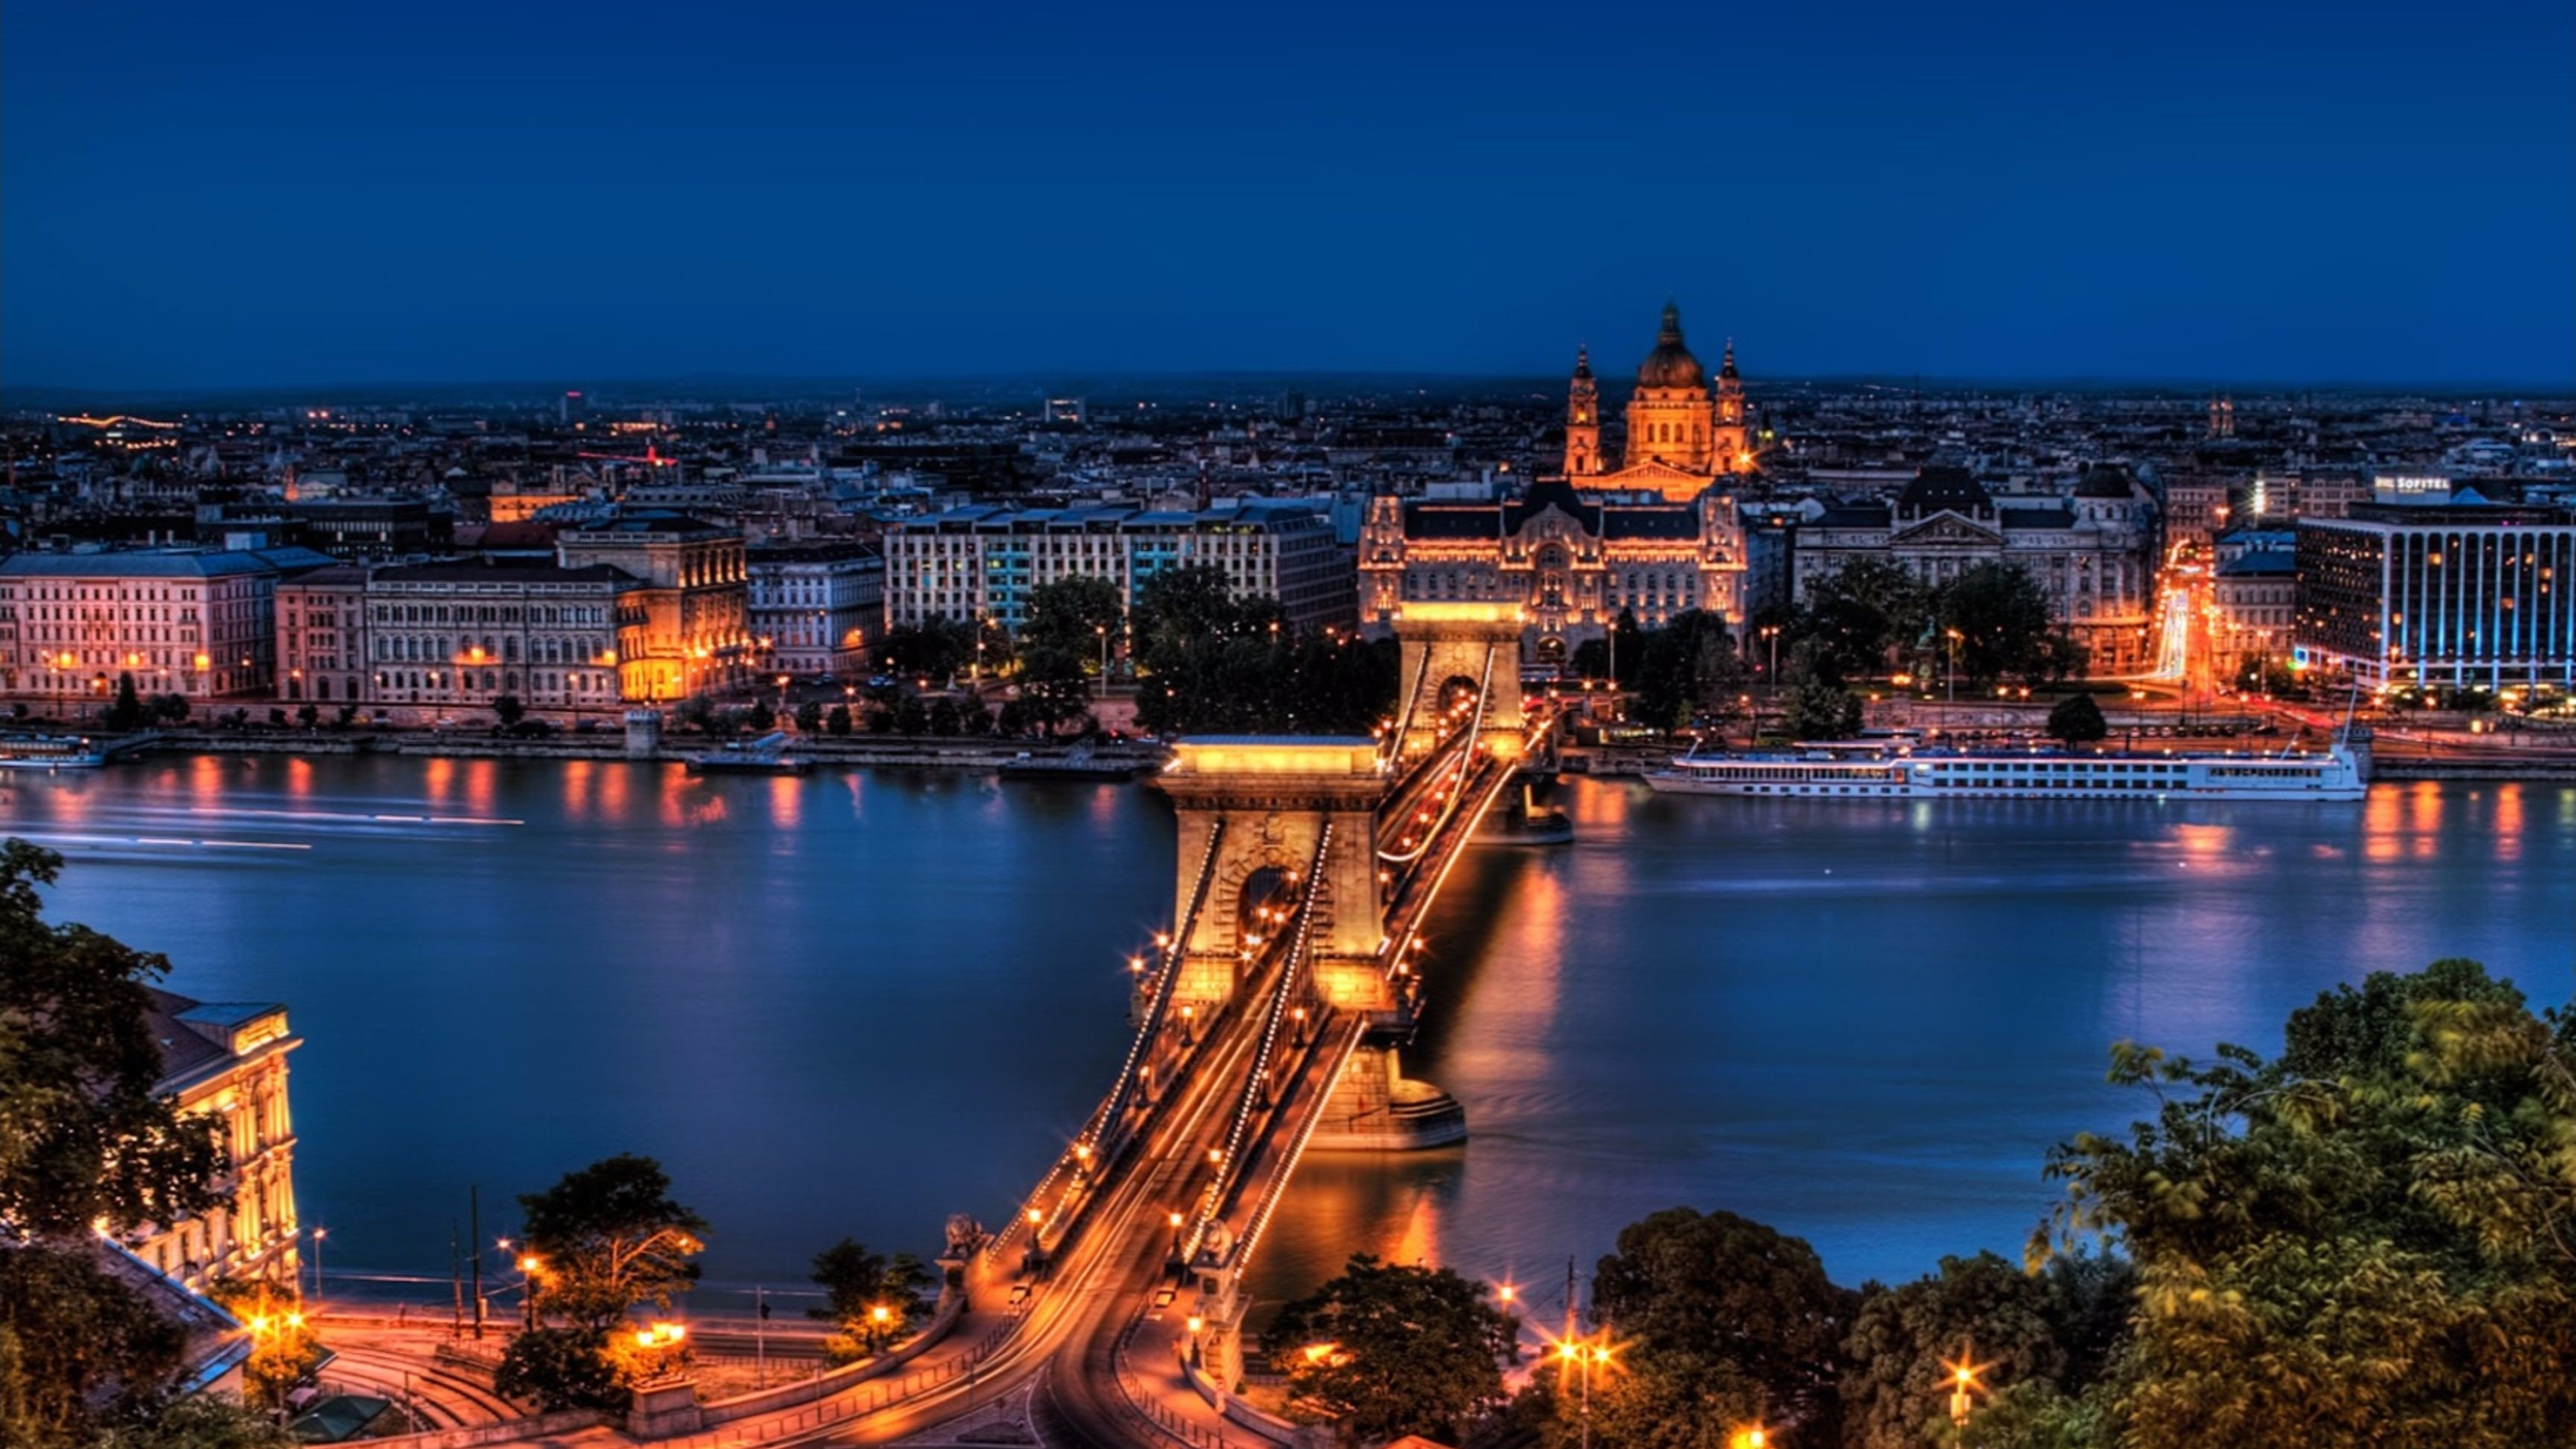 Budapest: The Danube River, City center, Notable monuments of classical architecture. 3840x2160 4K Wallpaper.